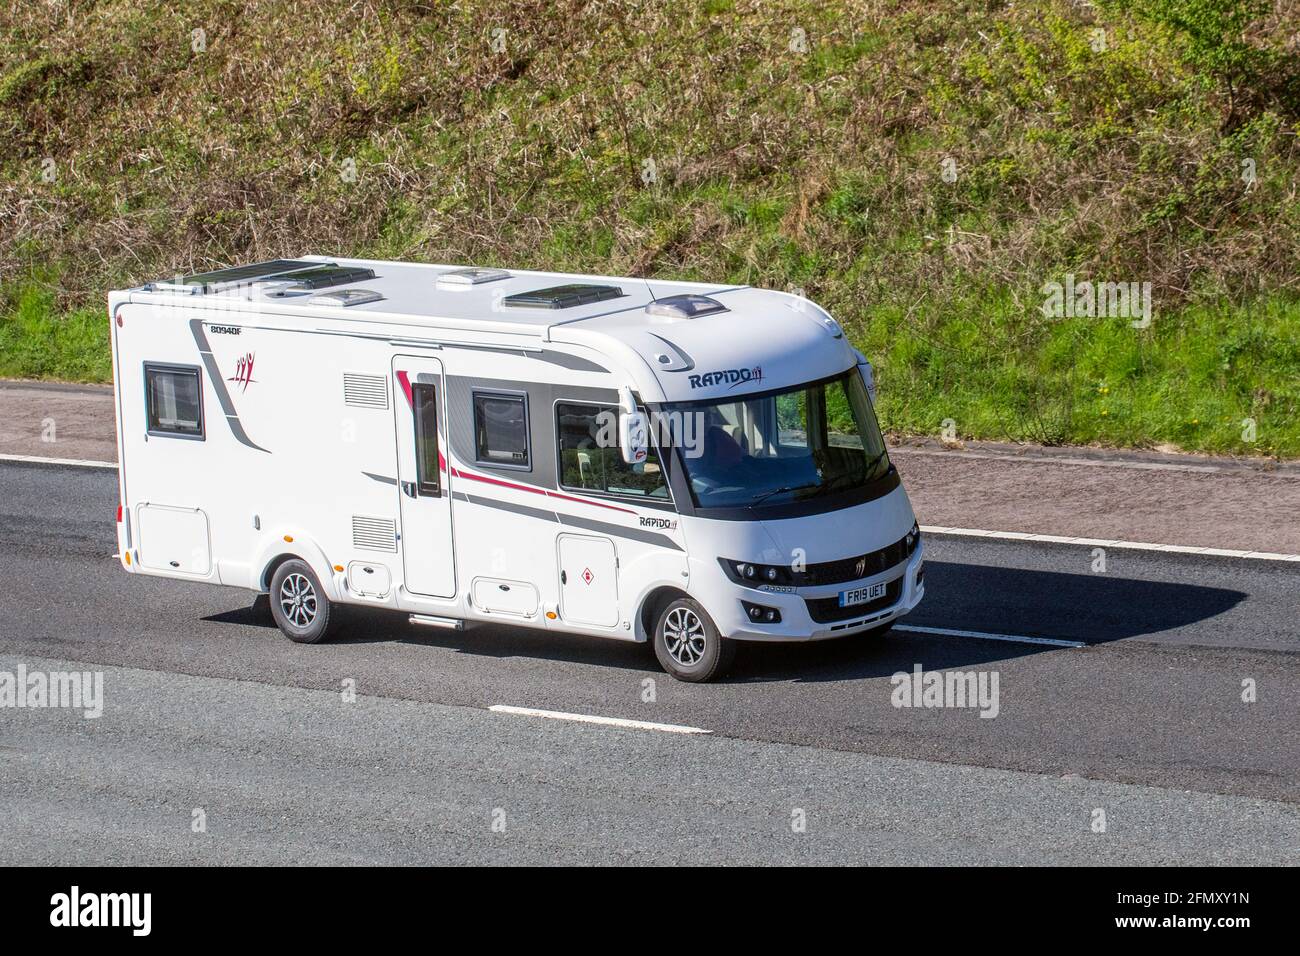 2019 Rapido 80945Df A-Class with FIAT AL-KO chassis;  camper; Caravans and Motorhomes, campervans on Britain's roads, RV leisure vehicle, family holidays, caravanette vacations, Touring caravan holiday, van conversions, Vanagon autohome, life on the road,  auto-sleeper Stock Photo